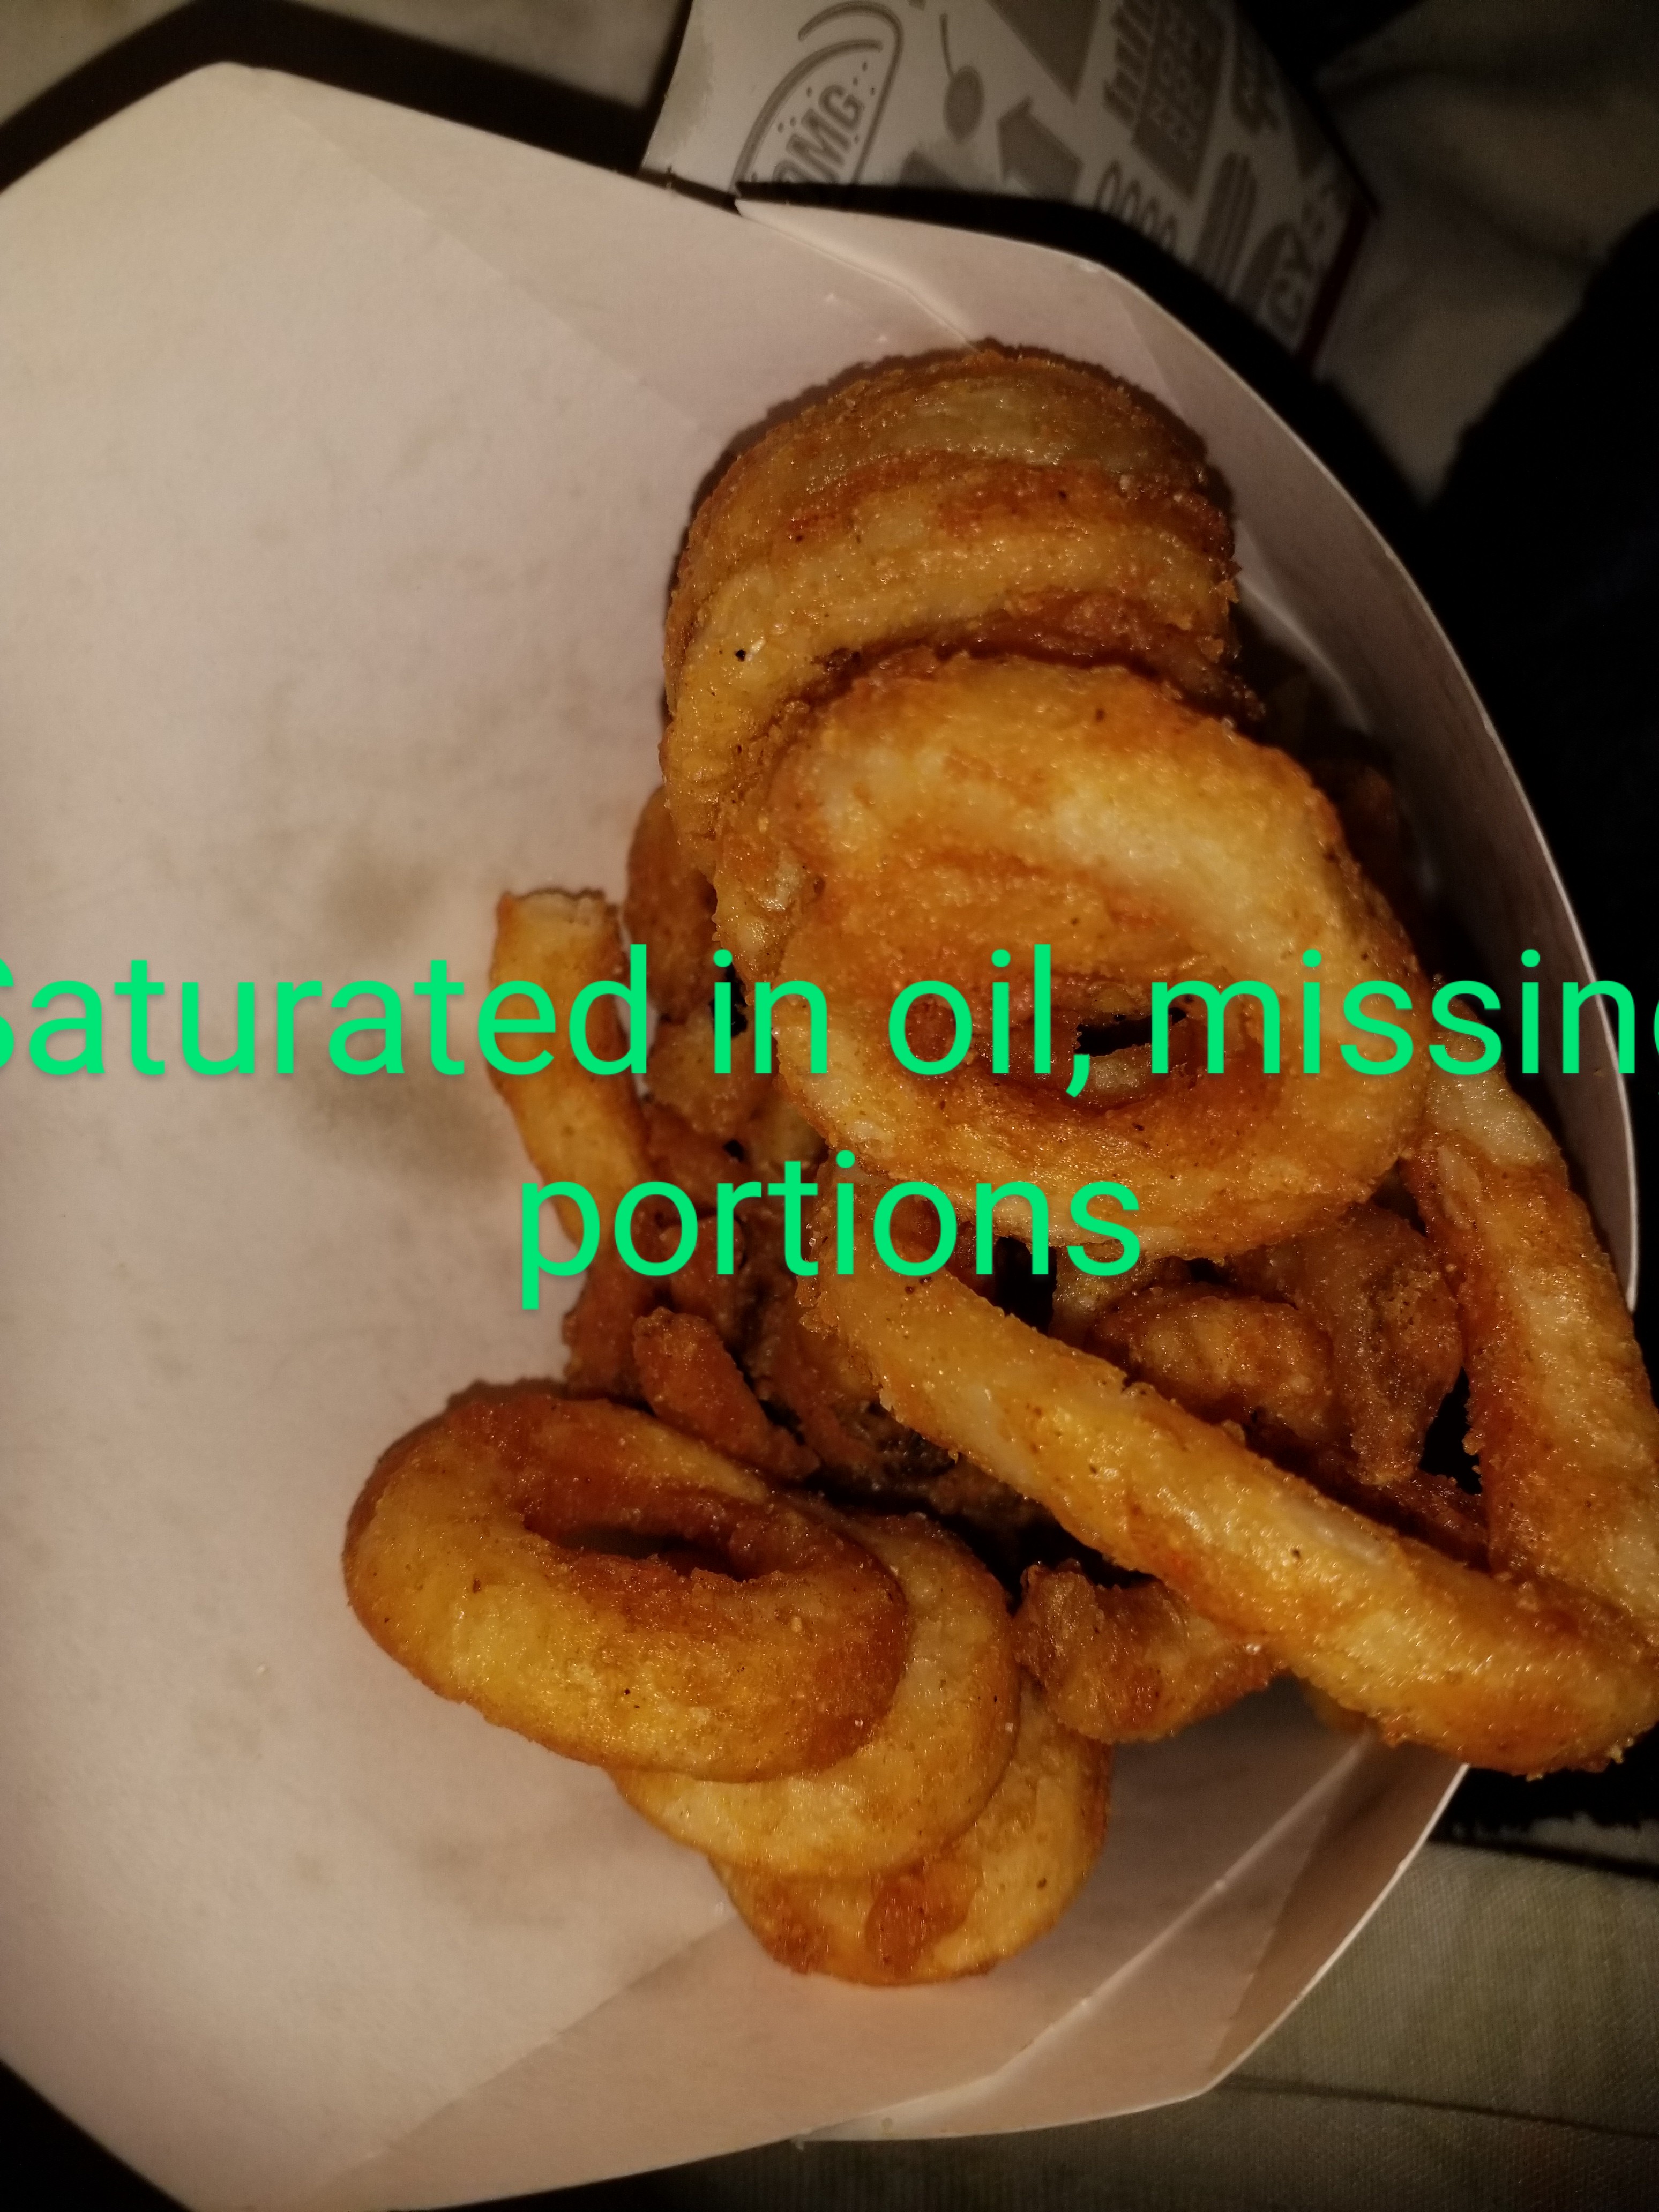 Missing portion, old, saturated in old cooking oil